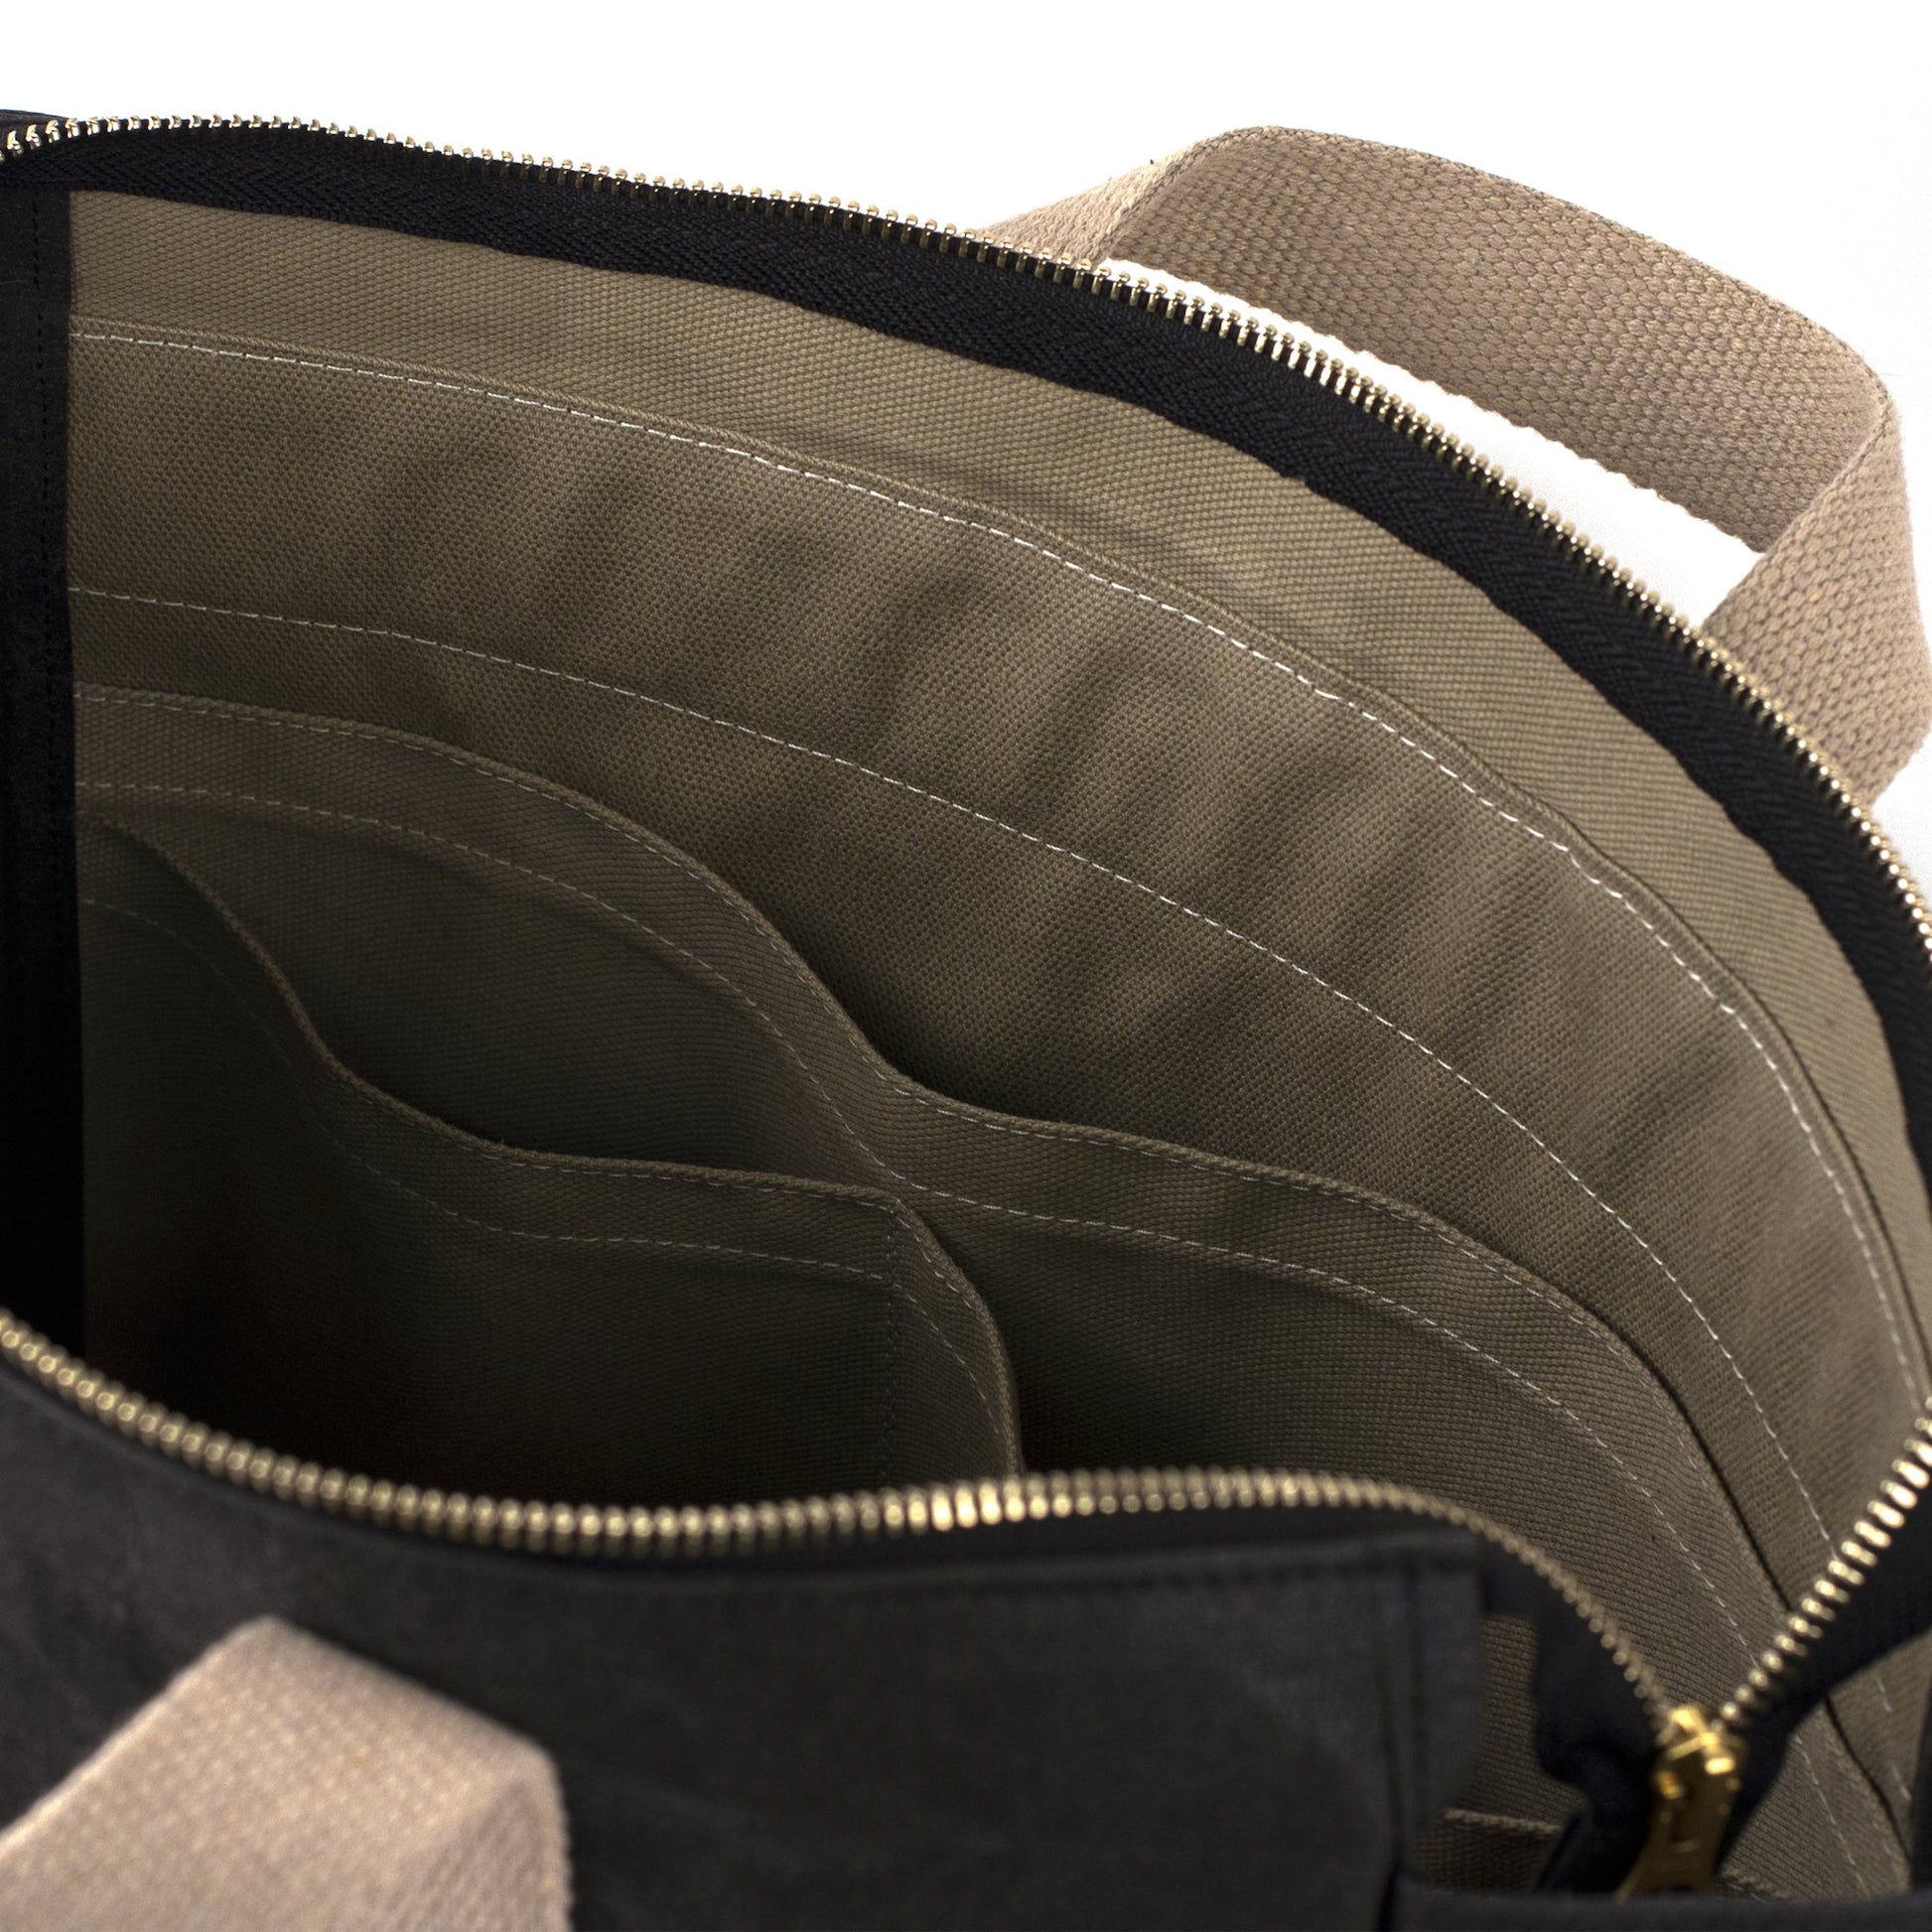 A black washable paper backpack is shown close up from a top-down angle. It features a khaki lining, with inside pockets and white stitching. It has a gold zip and two natural toned canvas handles.